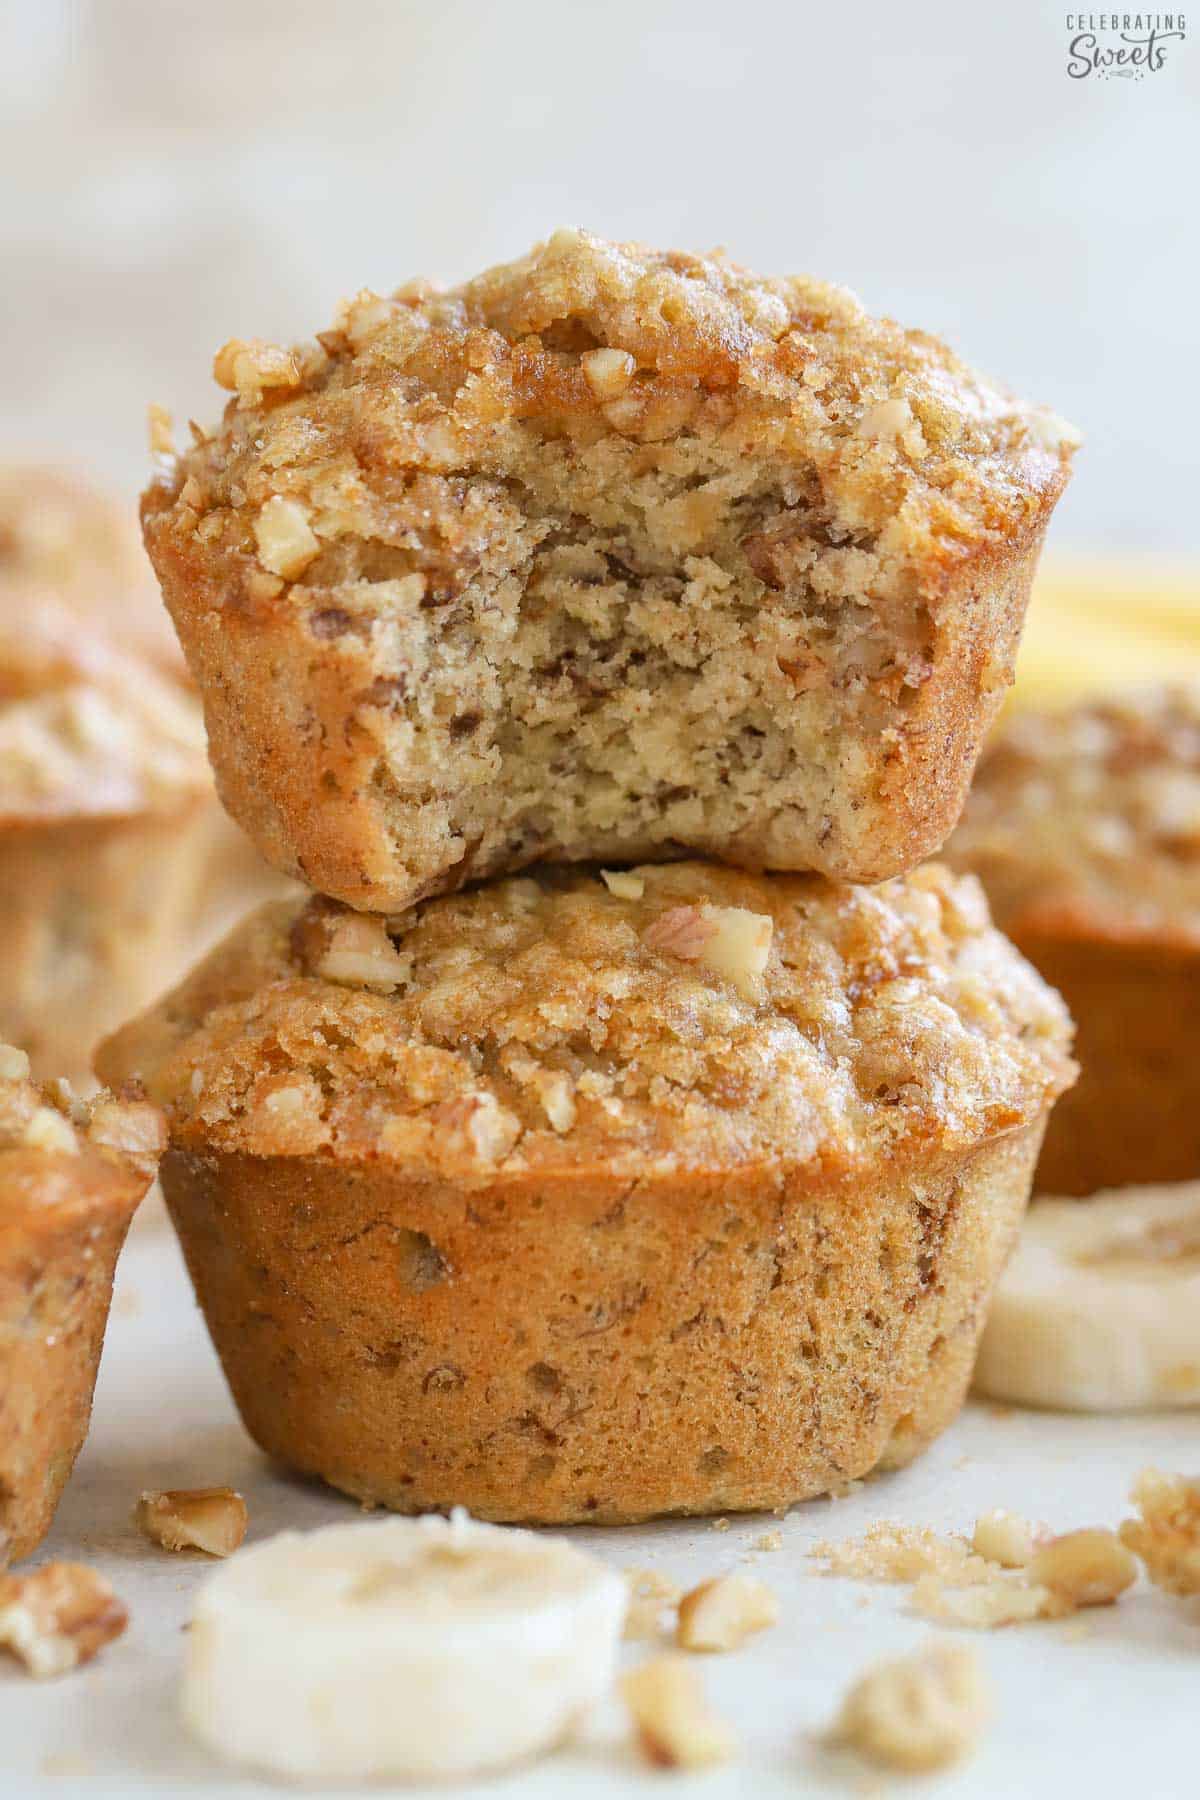 A banana nut muffin with a bite taken out of it stacked on top of another muffin.